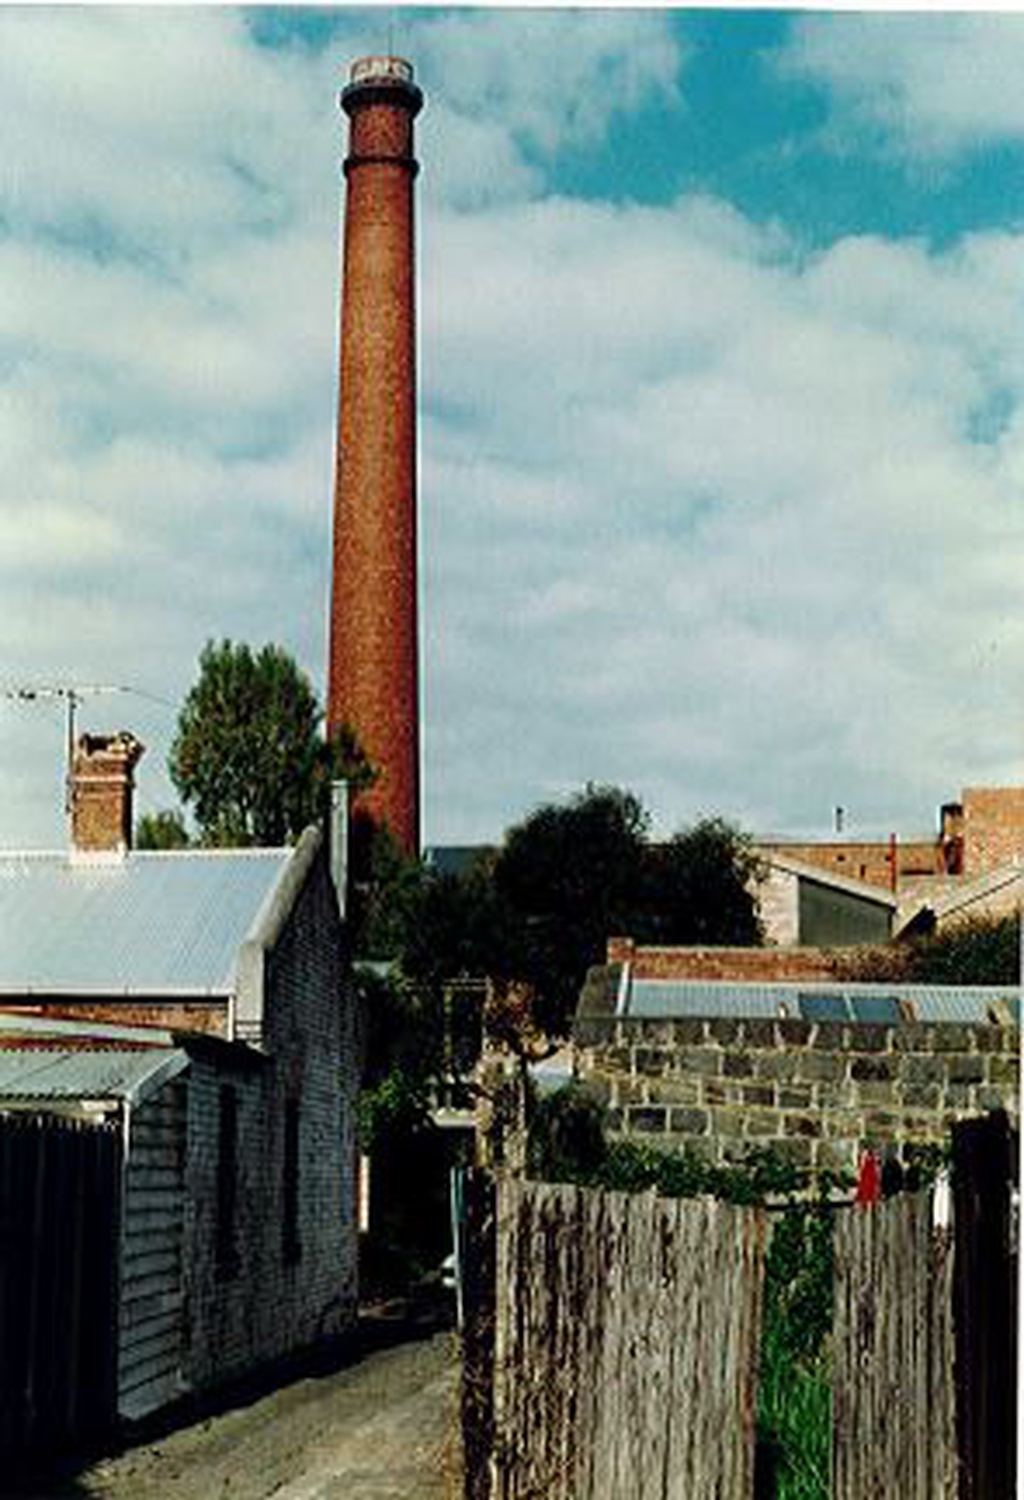 Guest’s Boot Factory chimney, Cremorne Street